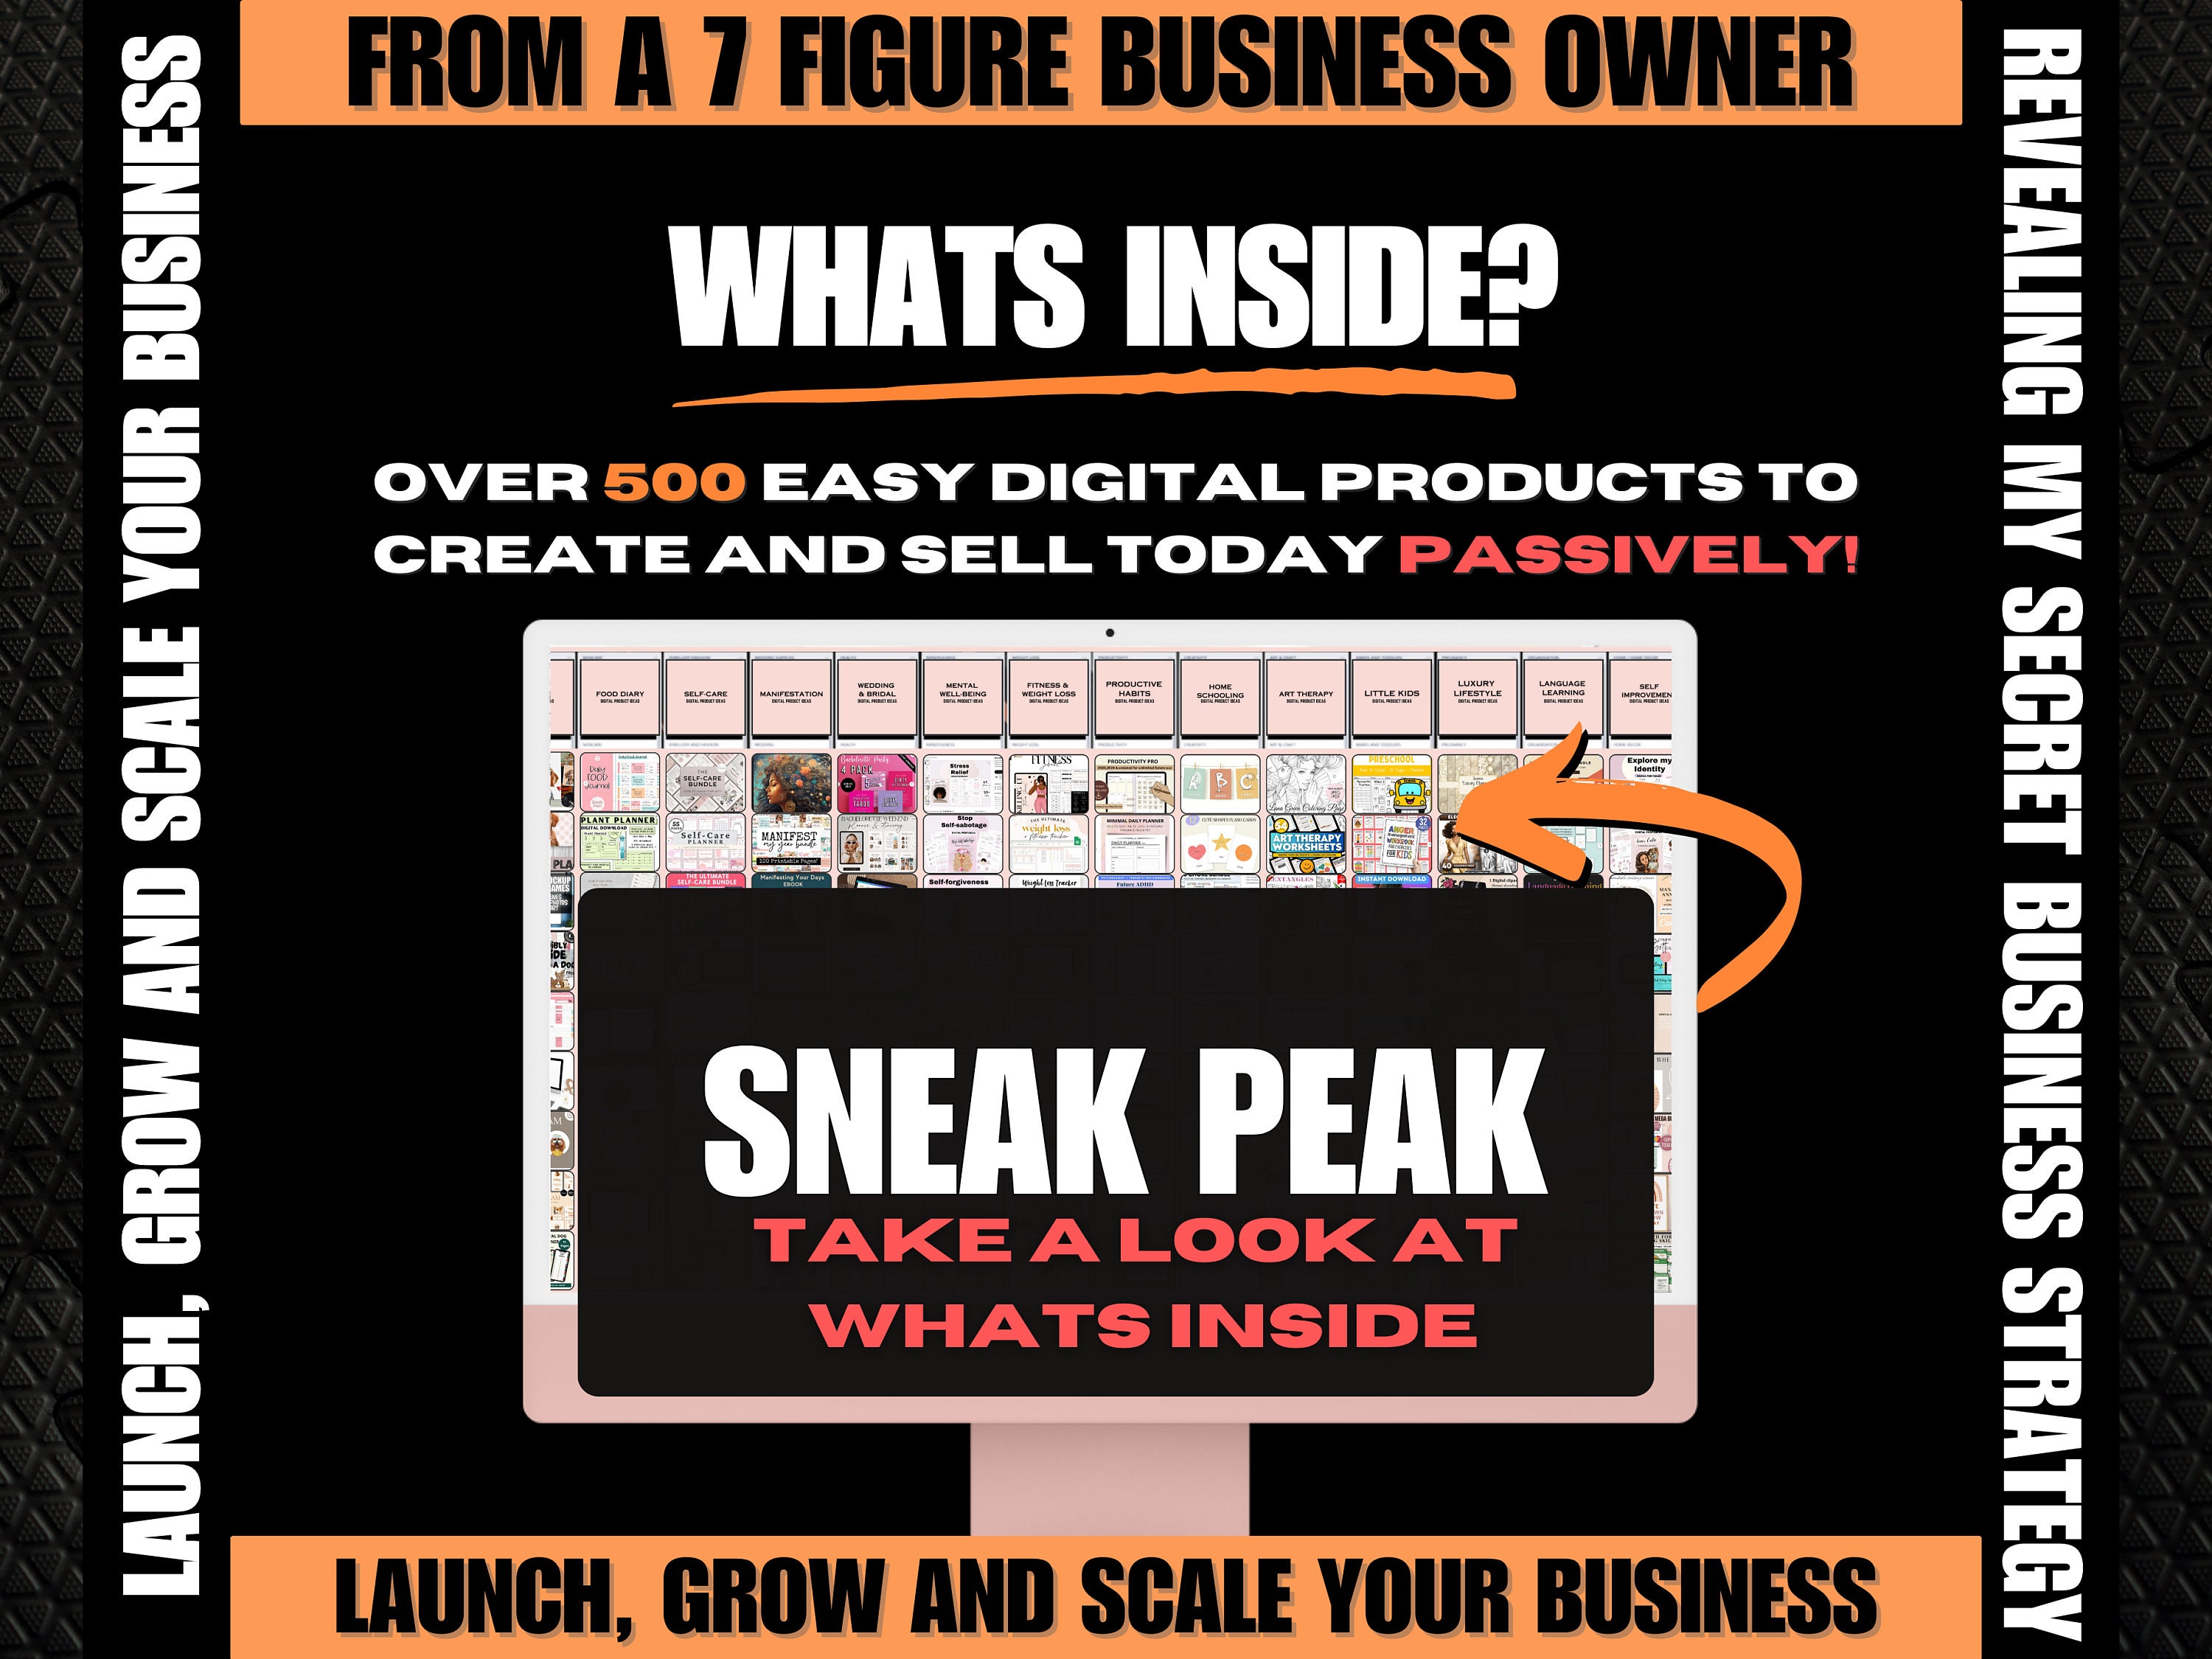 1000 Digital Products Ideas to Create and Sell Today for Passive Income,   Digital Downloads Small Business Ideas and Bestsellers to Sell 